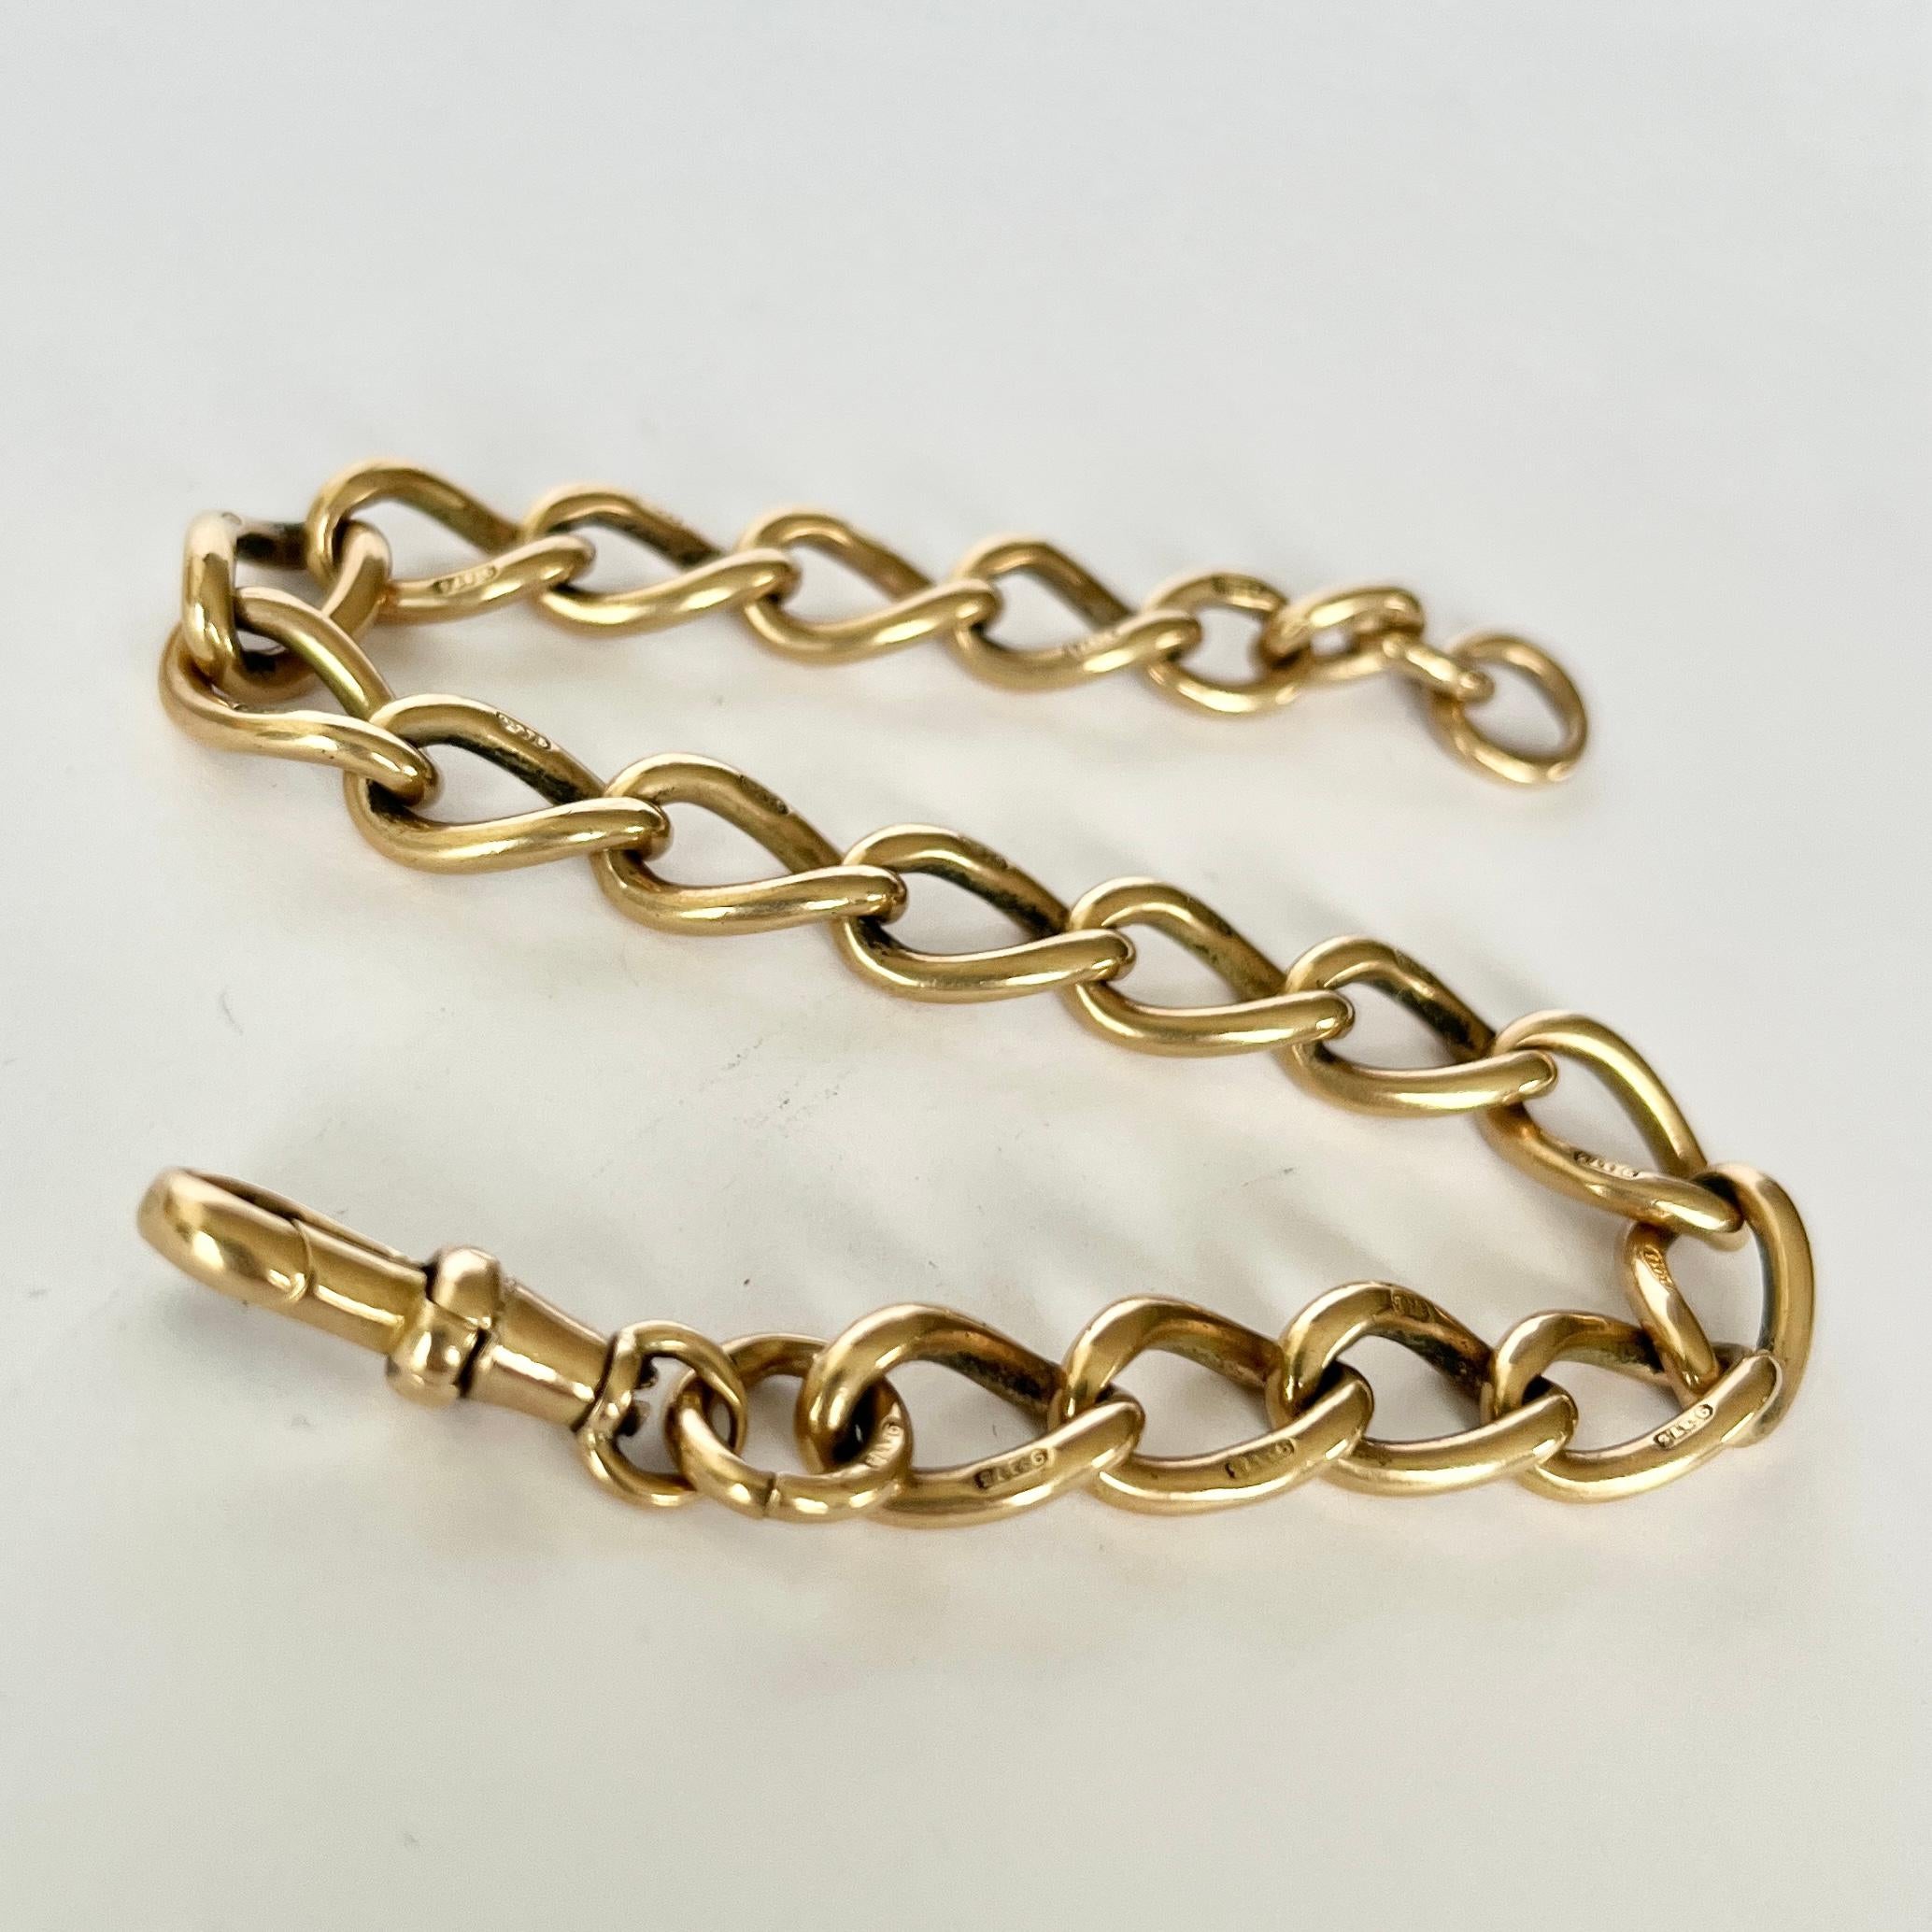 This glossy 9carat gold bracelet is made of solid gold and features a dog clip one end. Every link is hallmaked.

Length: 22cm
Width: 8.5mm

Weight: 25g